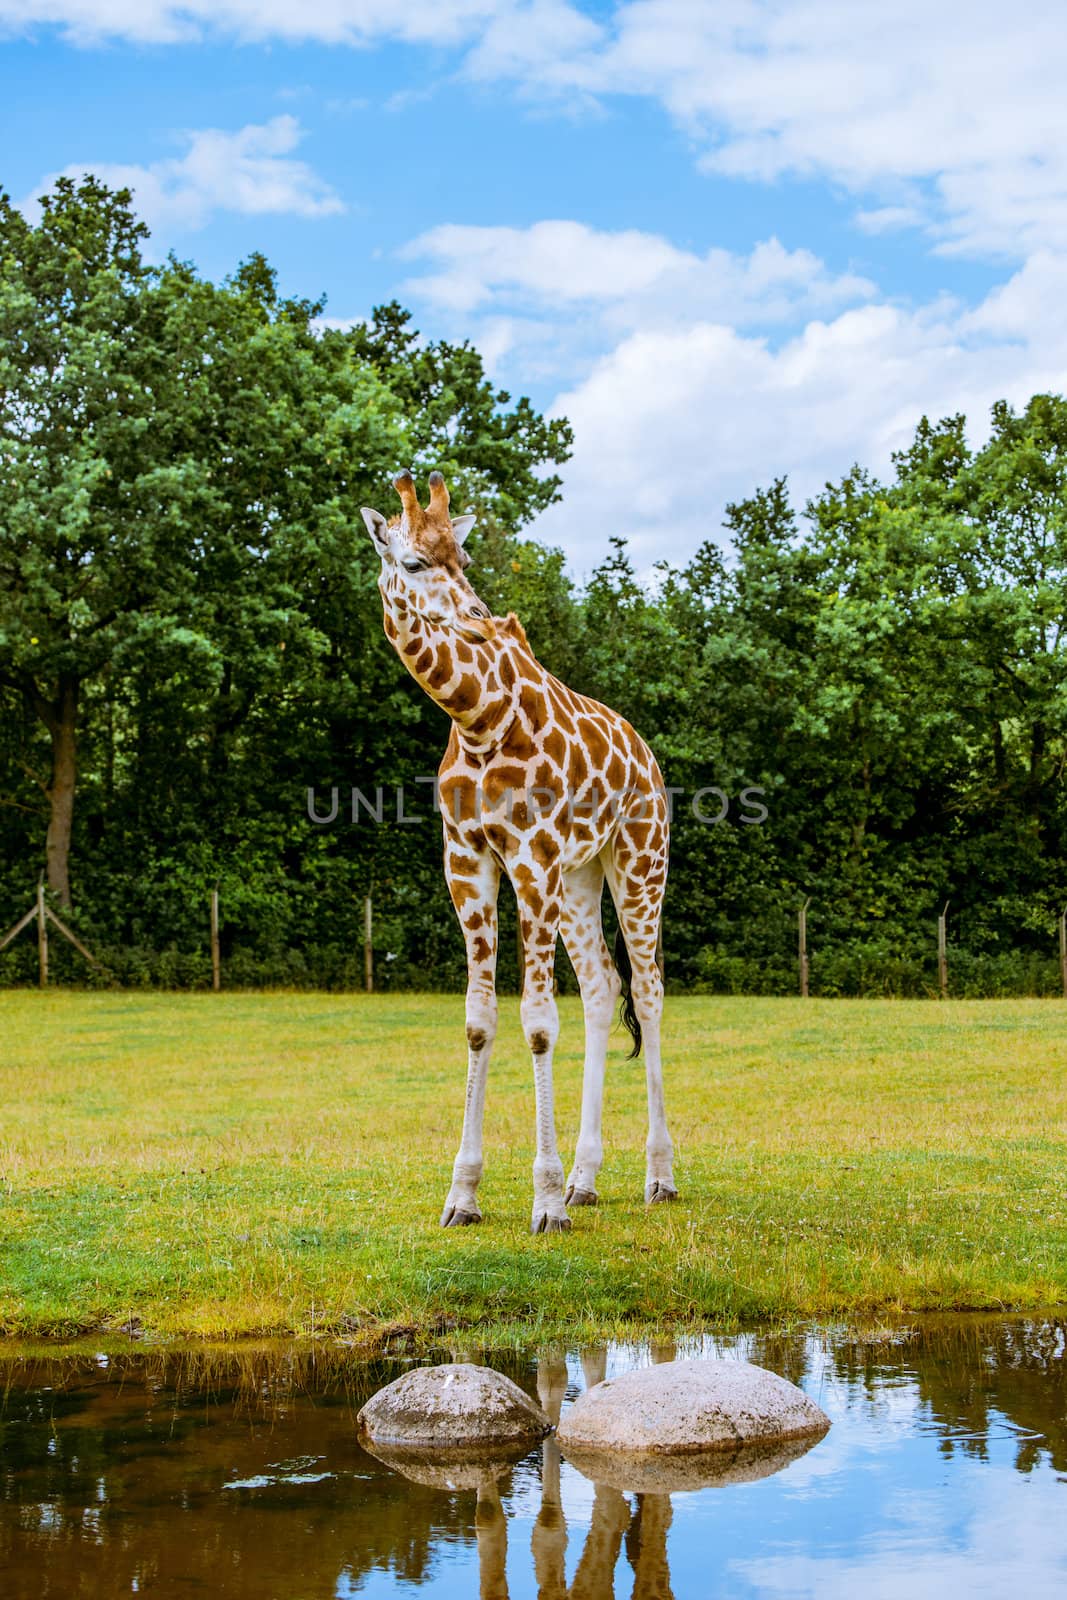 Thirsty giraffe looking into the water by Sportactive